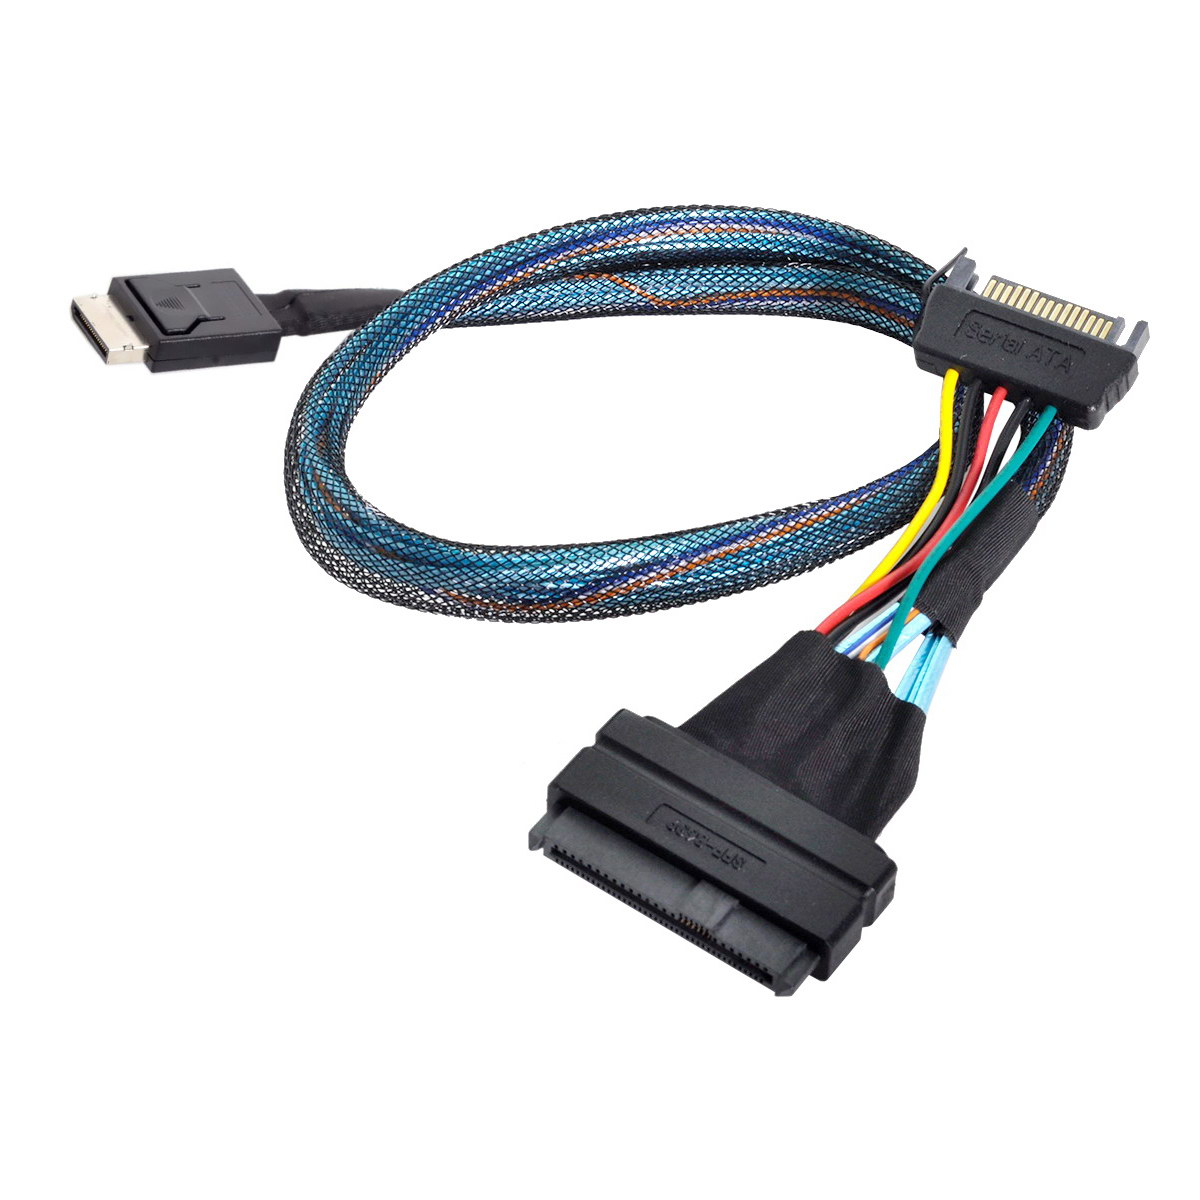 CableDeconn Oculink SFF-8611 to SFF-8639 U.2 U.3 NVME PCIe PCI-Express Cable 0.5m for SSD with 15Pin SATA Power Cable G0108